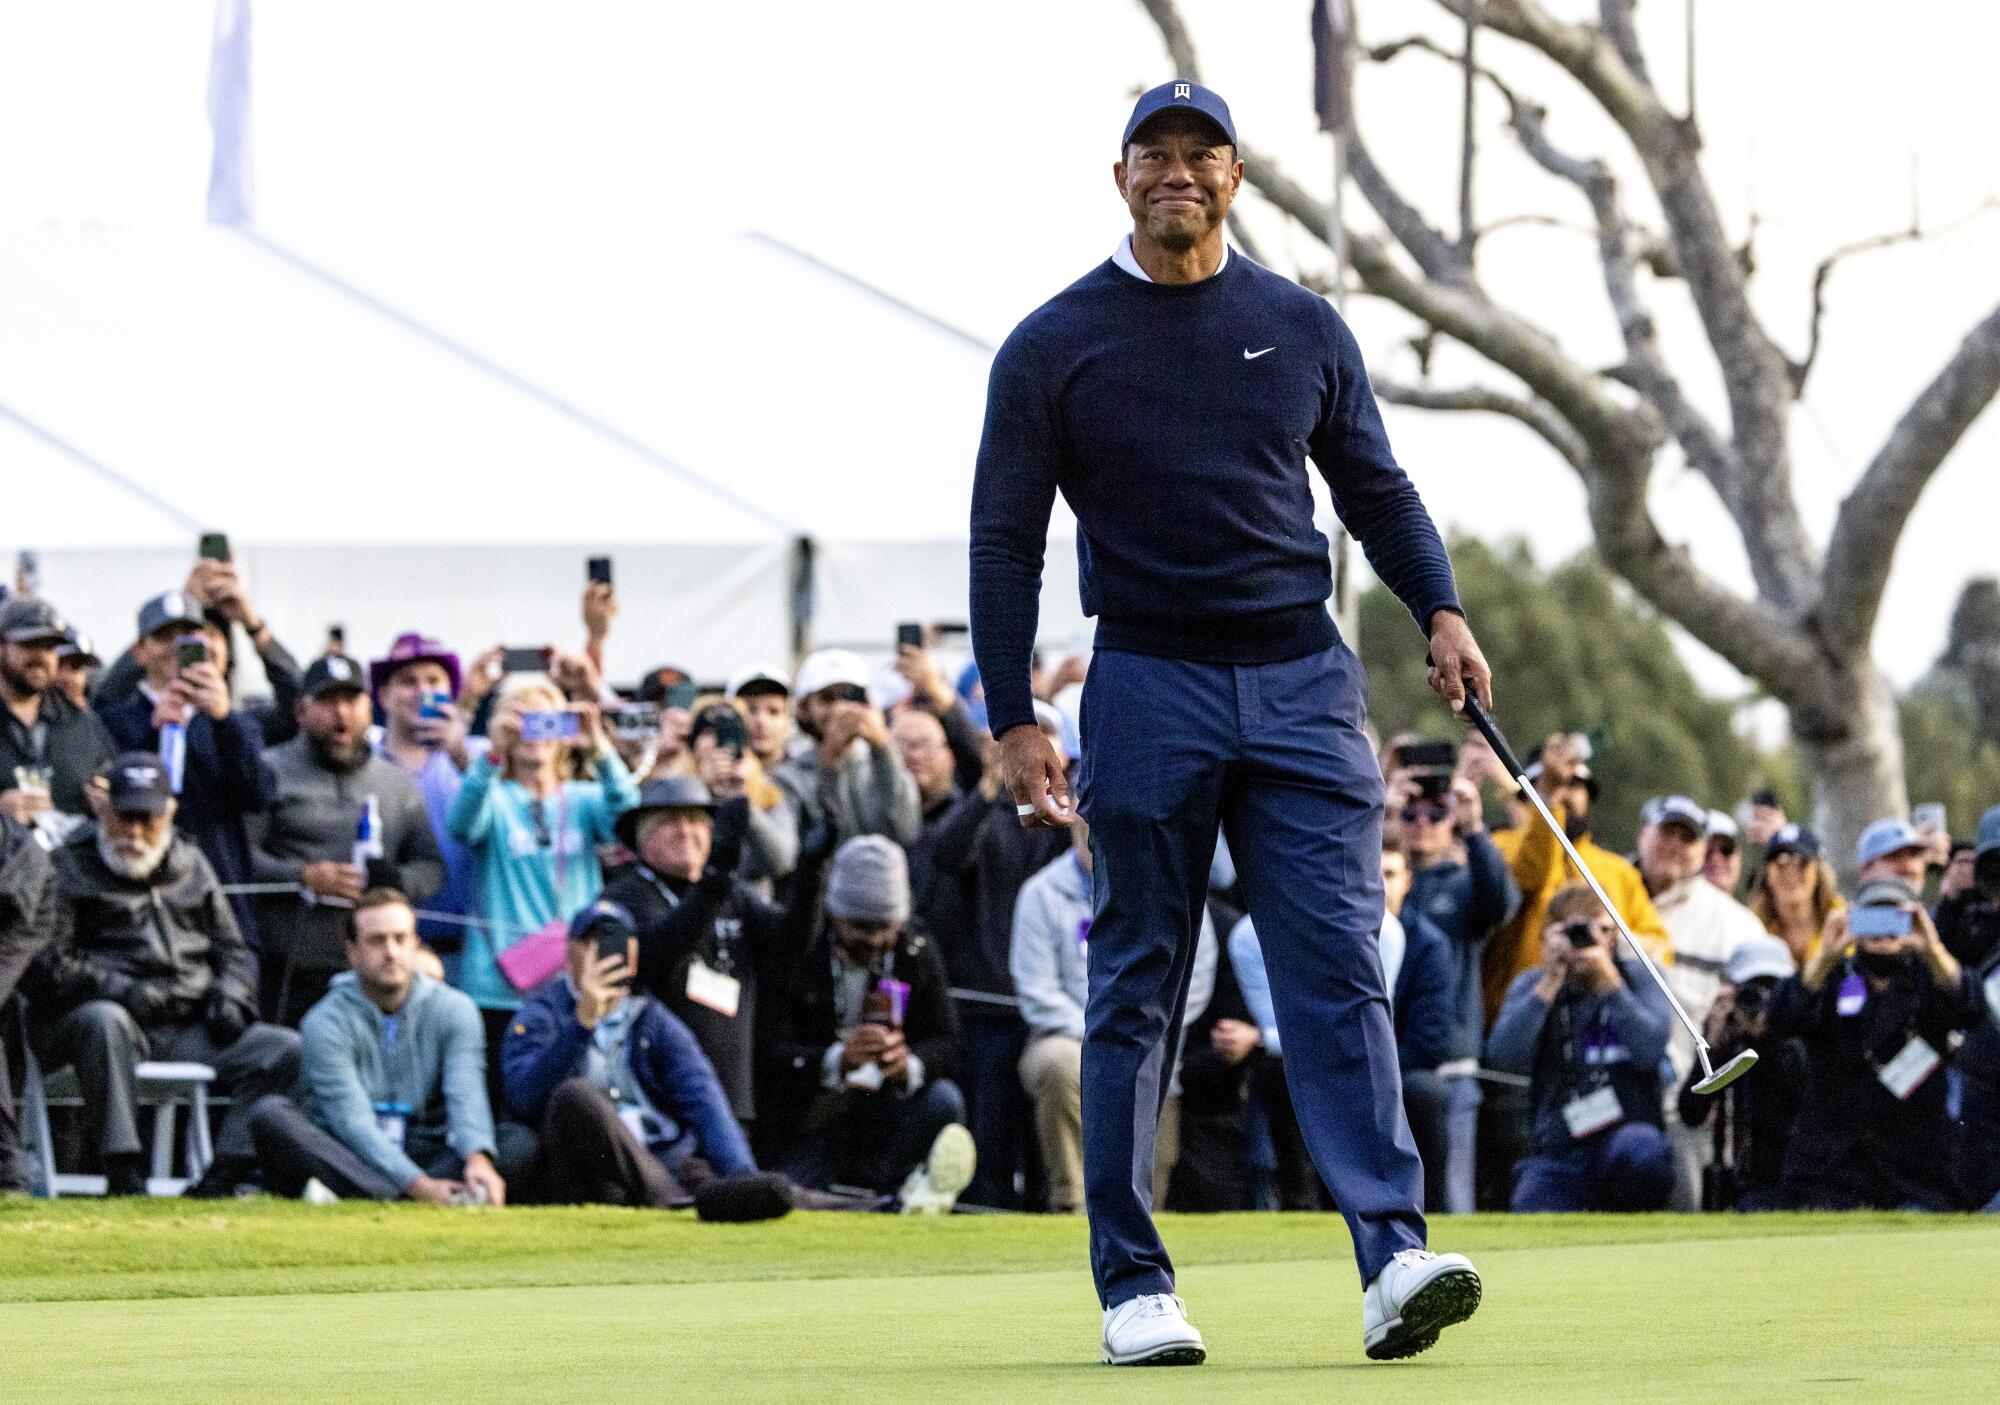 Tiger Woods acknowledges the crowd after a birdie on 18 to end his first round.